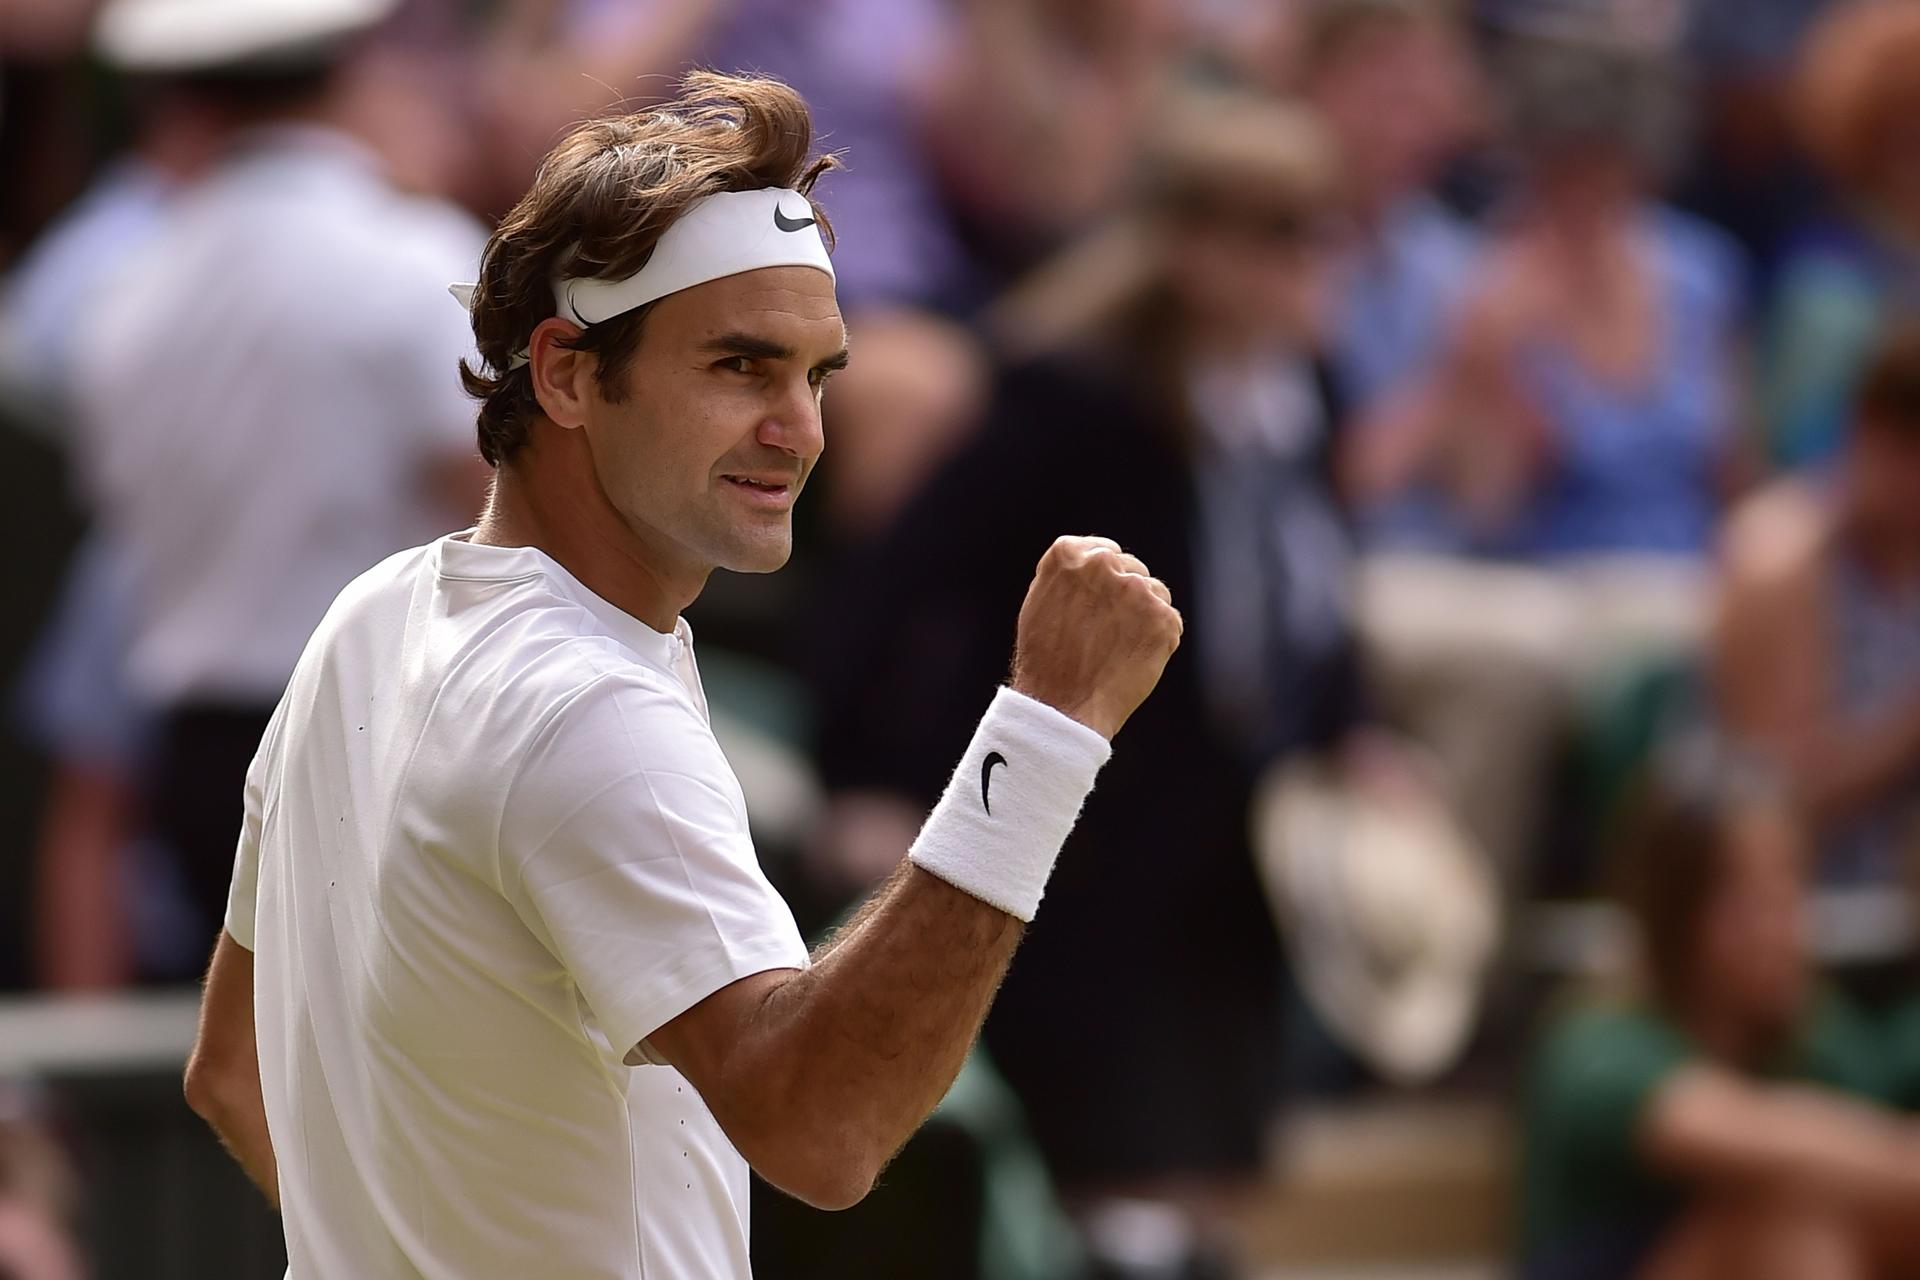 Roger Federer was in imperious form as he rolled back the years to beat Britain's Andy Murray. Photos: AFP